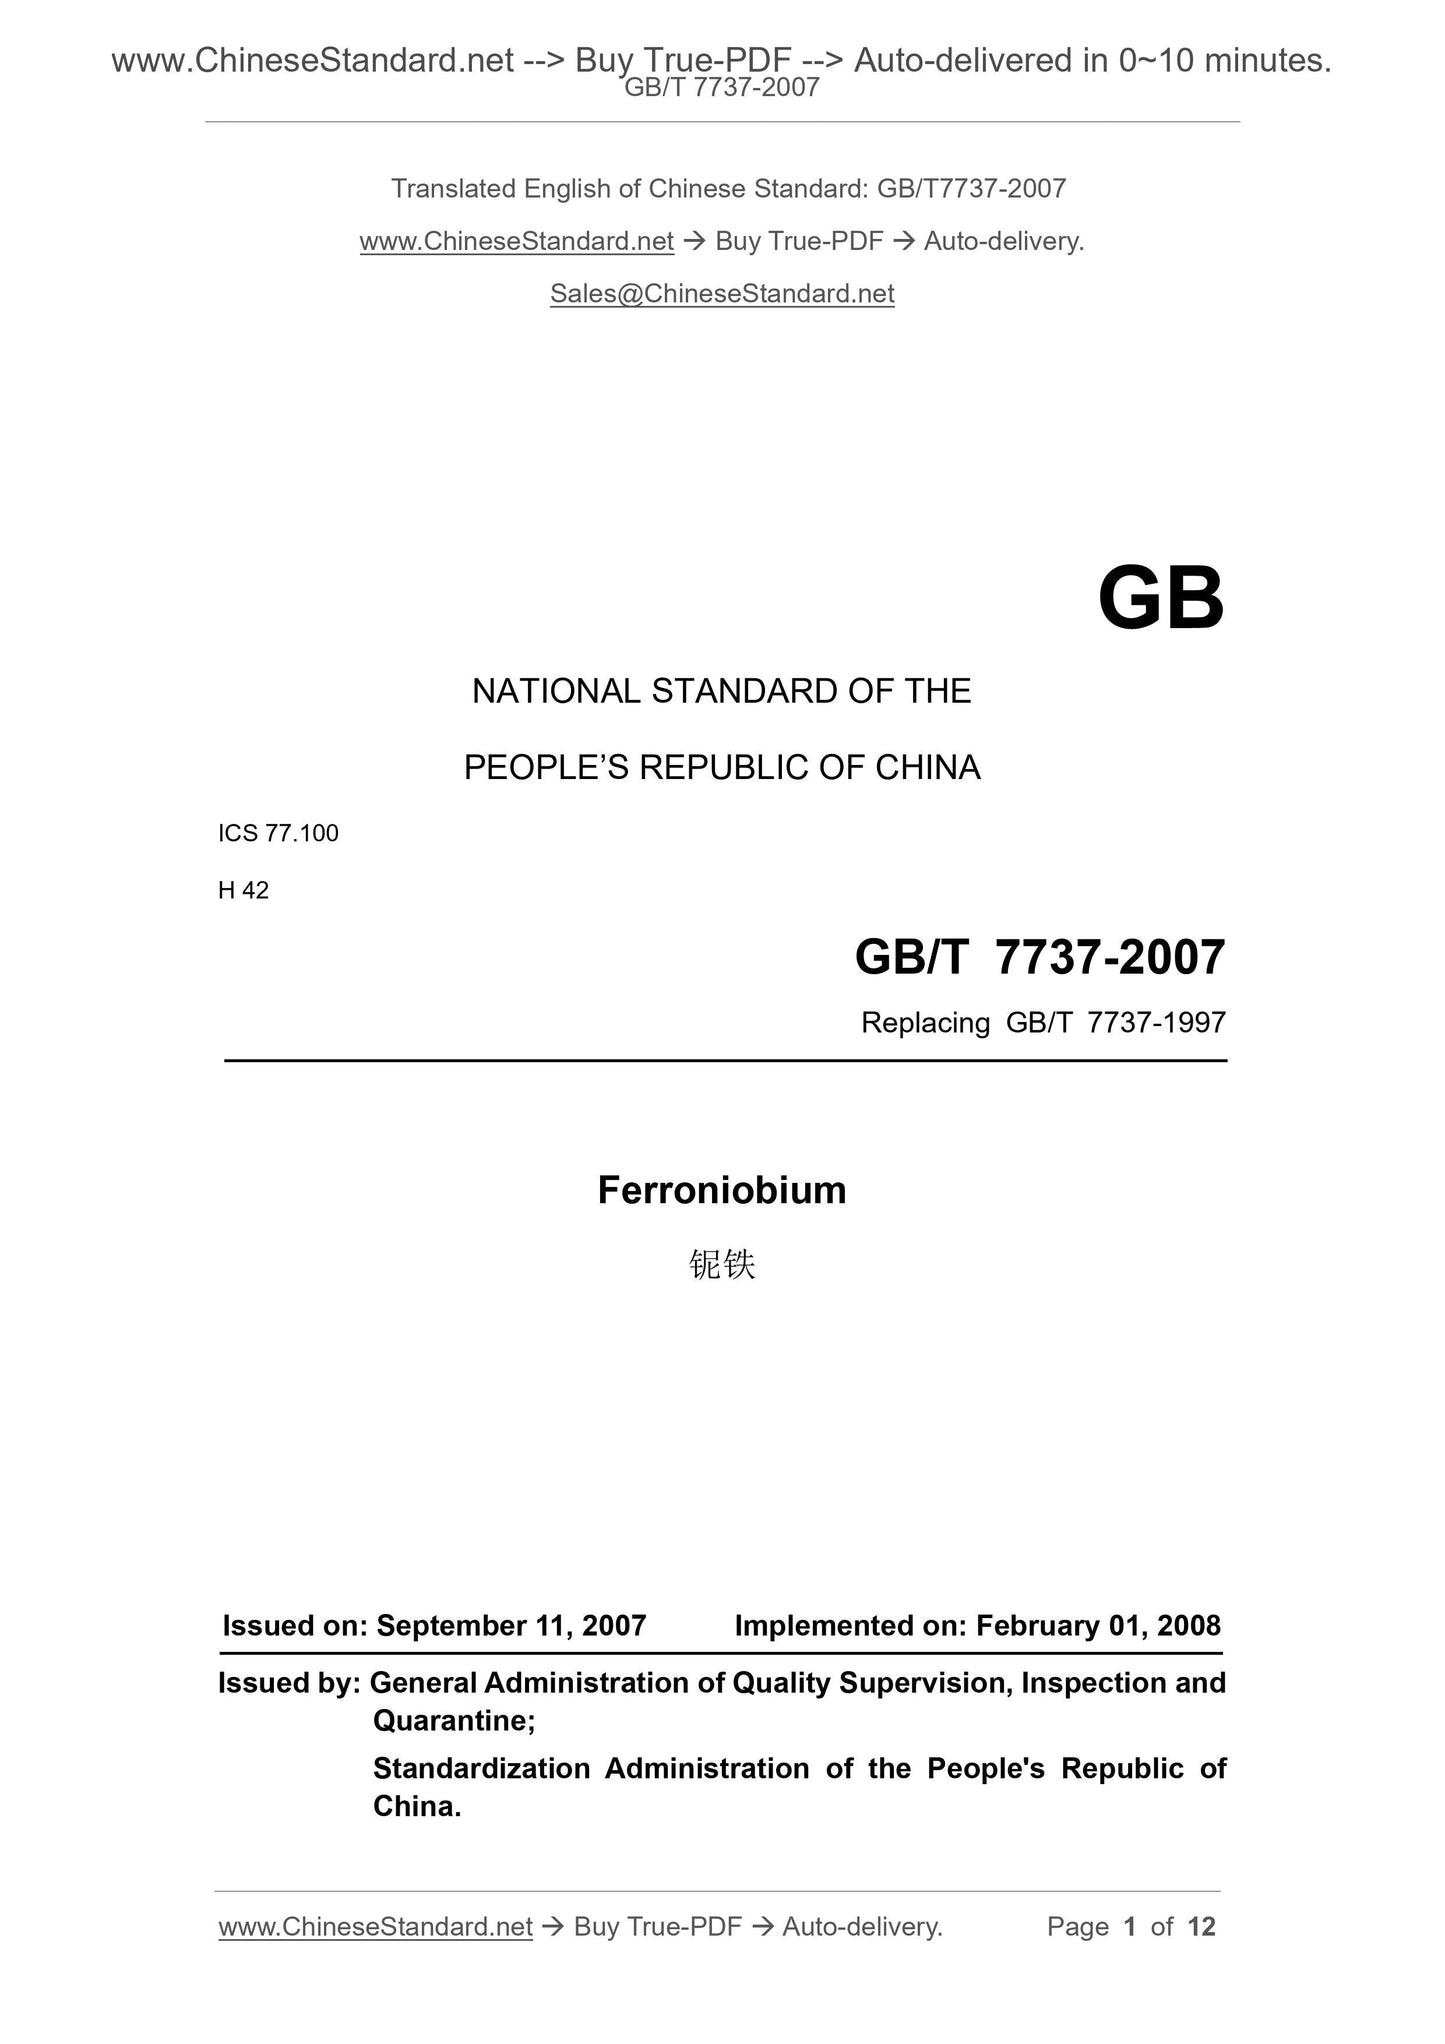 GB/T 7737-2007 Page 1